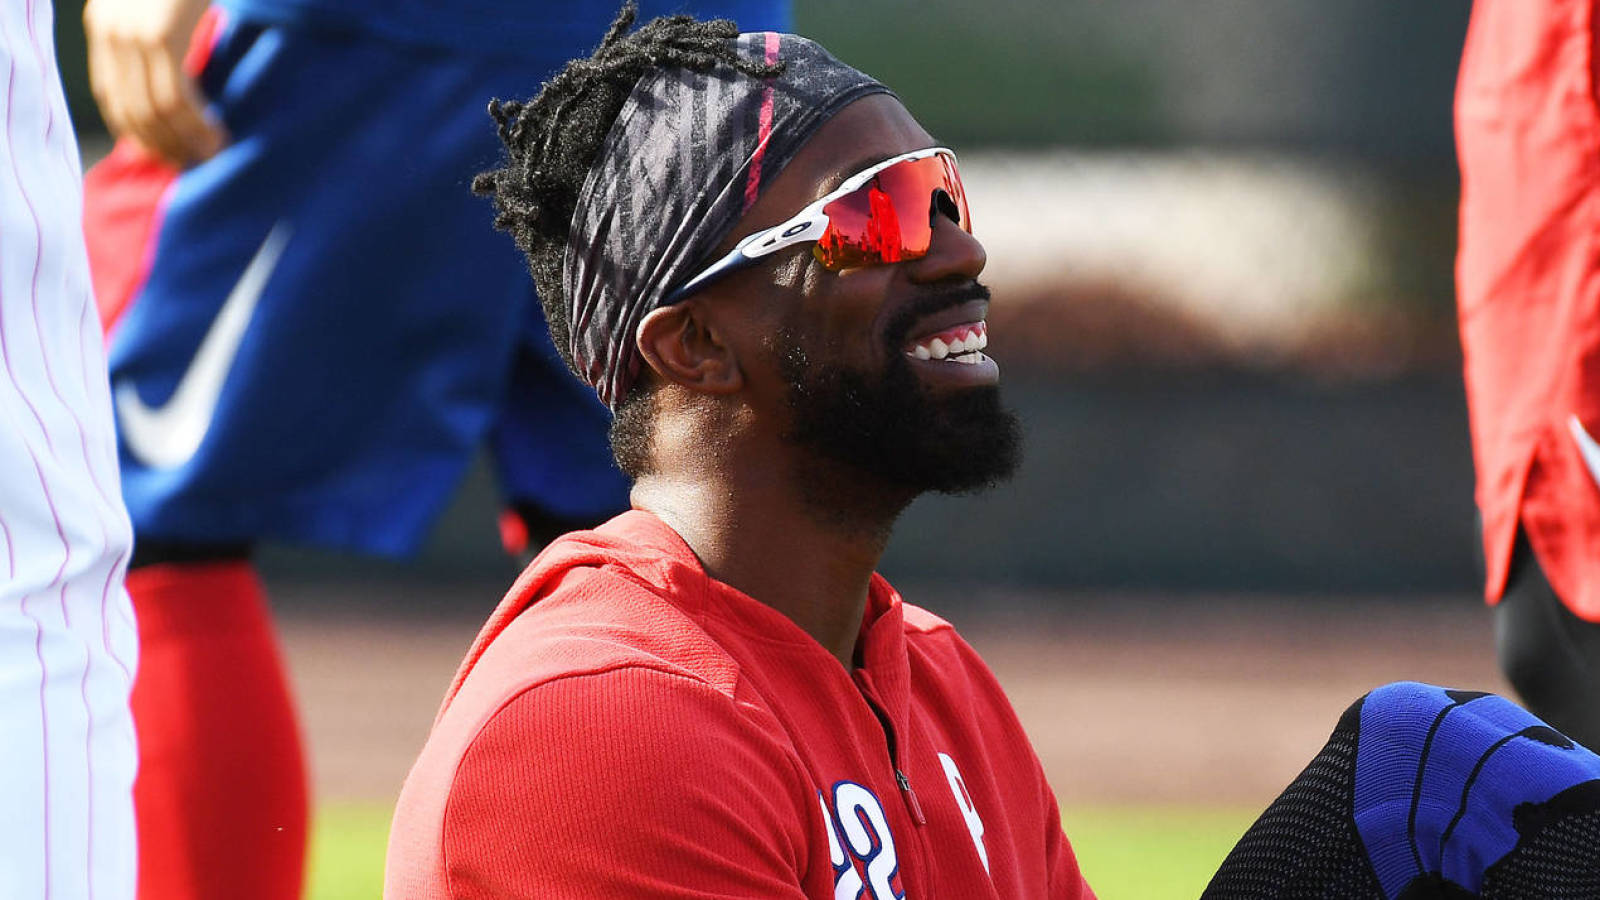 Phillies' Andrew McCutchen: Yankees hair policy 'takes away from